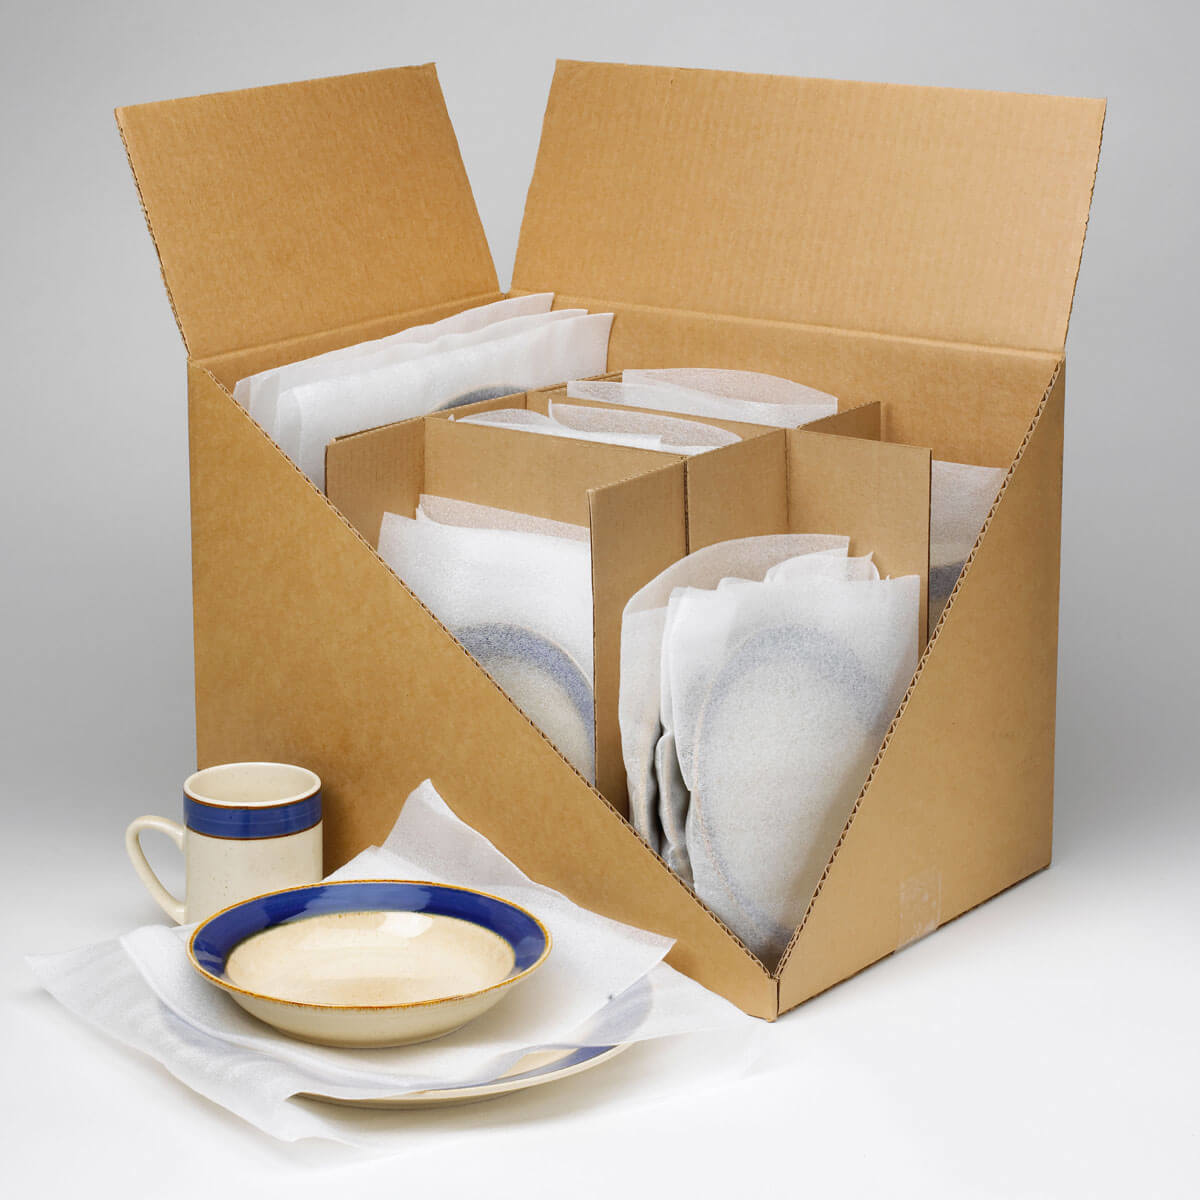 Picture of Dish Saver Kit for Small Box